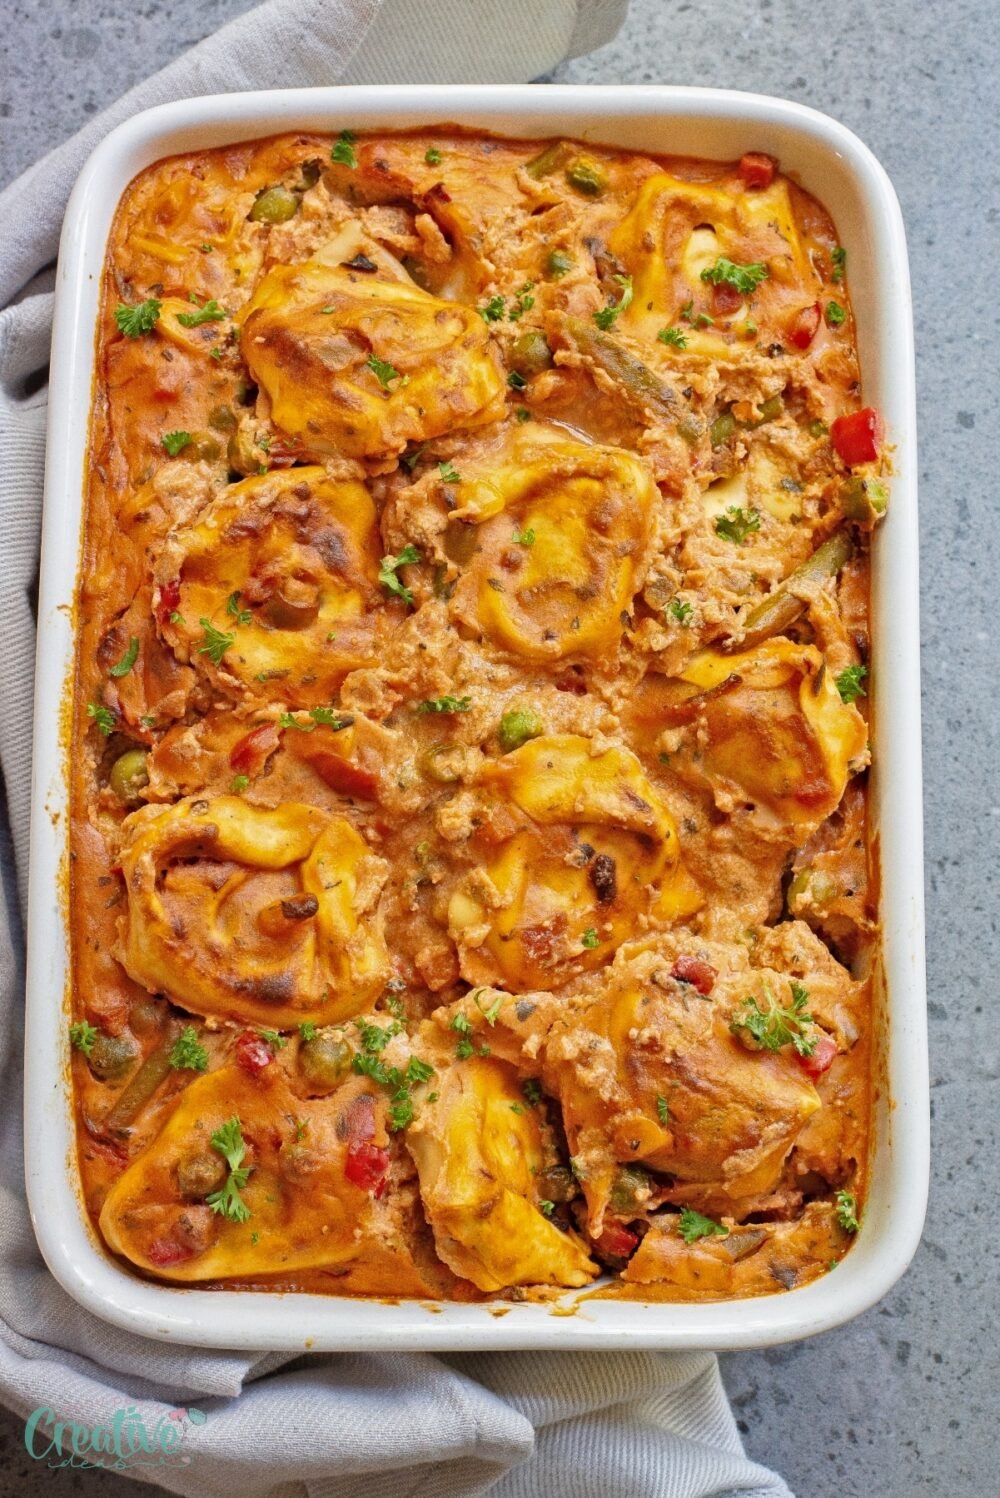 This easy baked tortellini casserole is the perfect dinner idea on busy weeknight when cooking is the last thing on your mind!